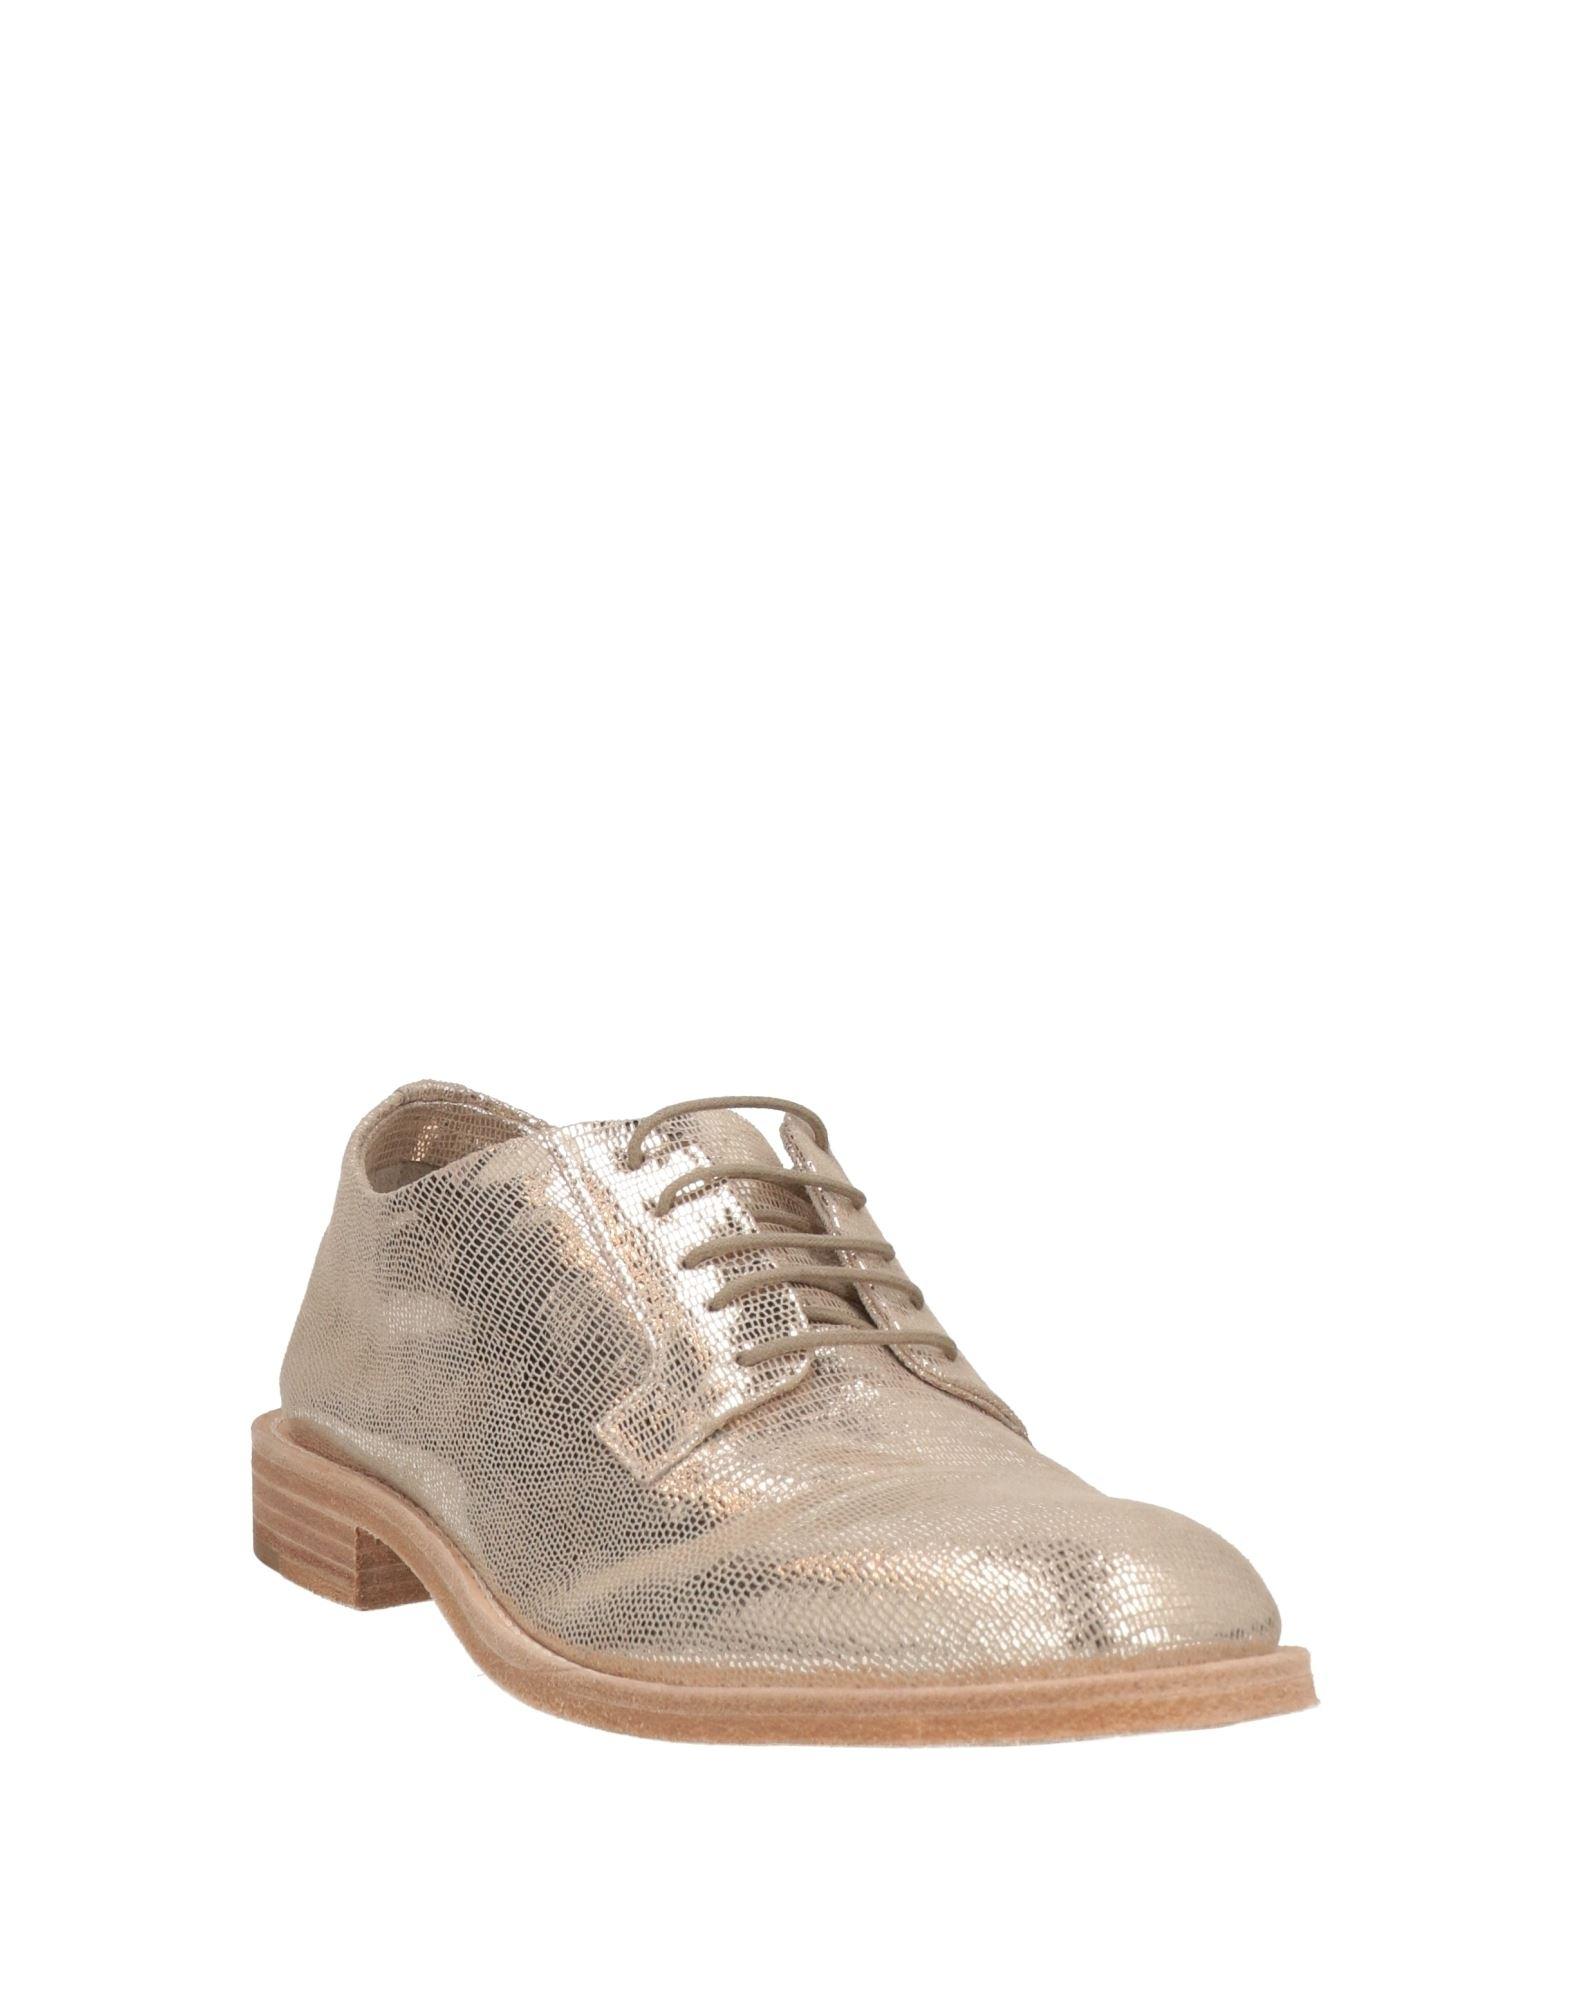 Roberto Del Carlo Lace-up Shoes in White | Lyst